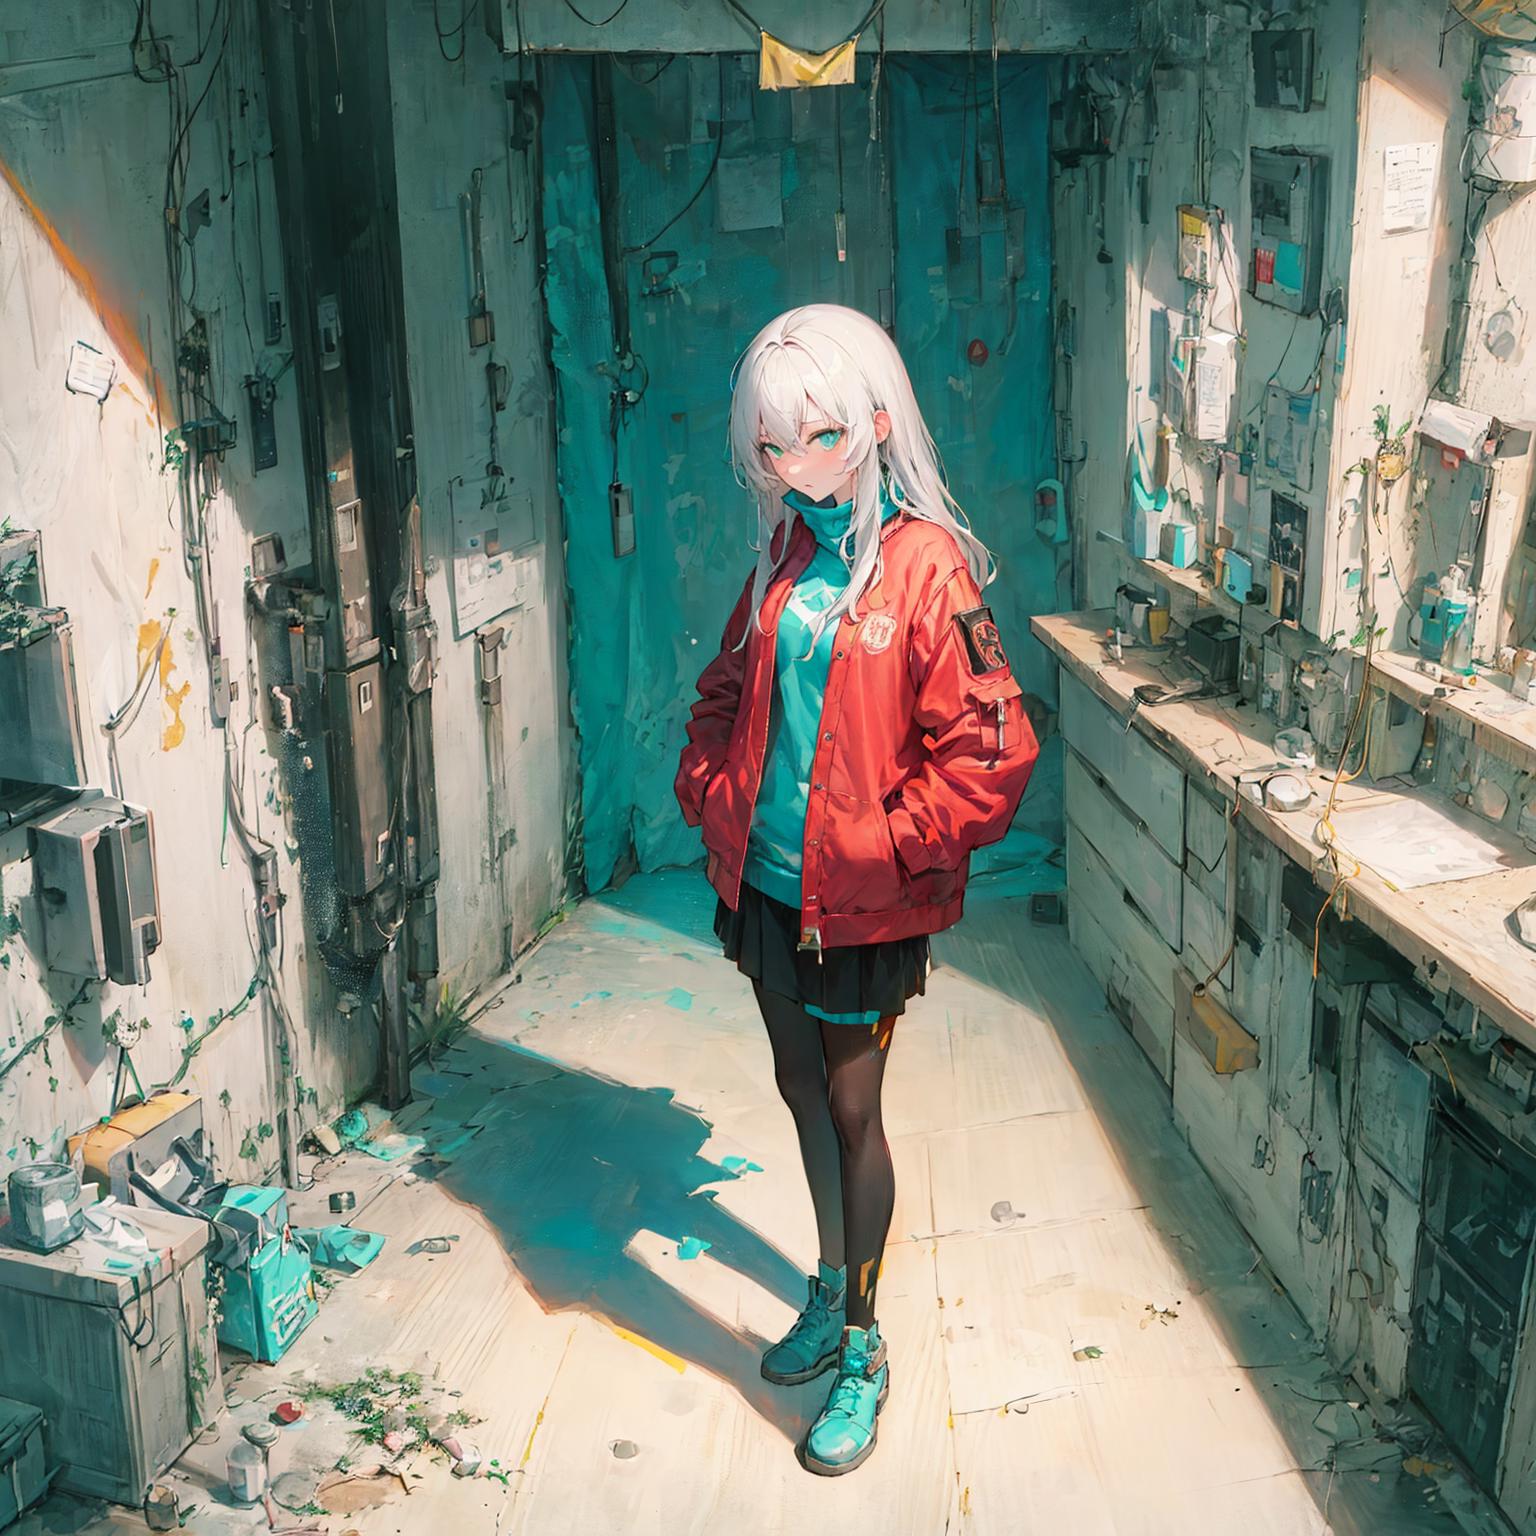 A girl in a red jacket and black skirt standing in an abandoned room.